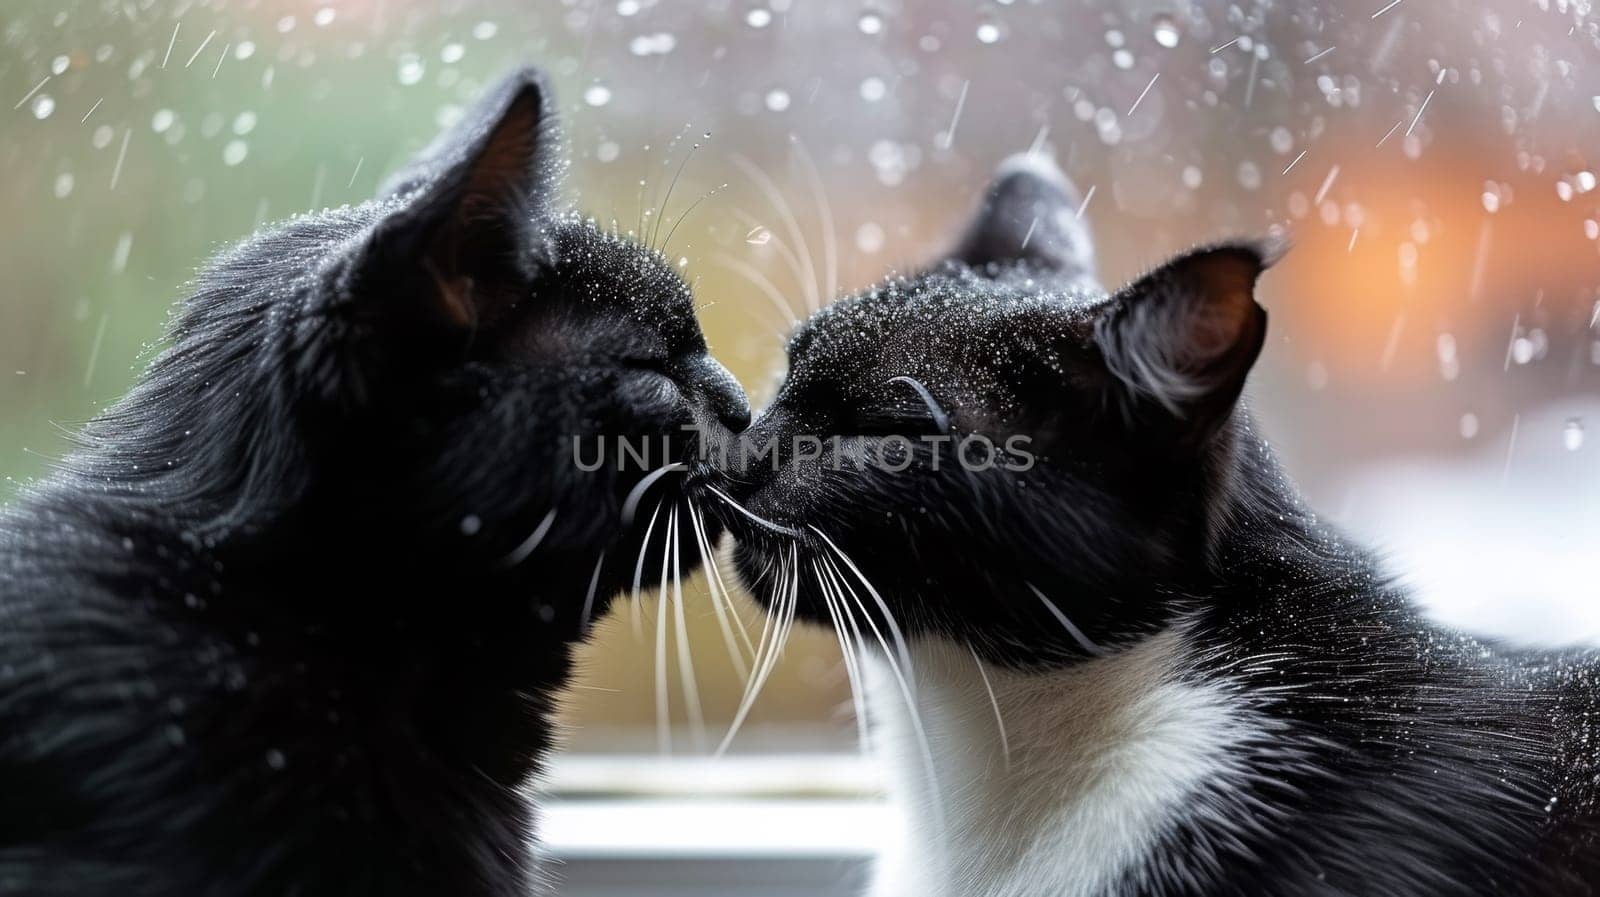 Two cats are kissing each other in front of a window